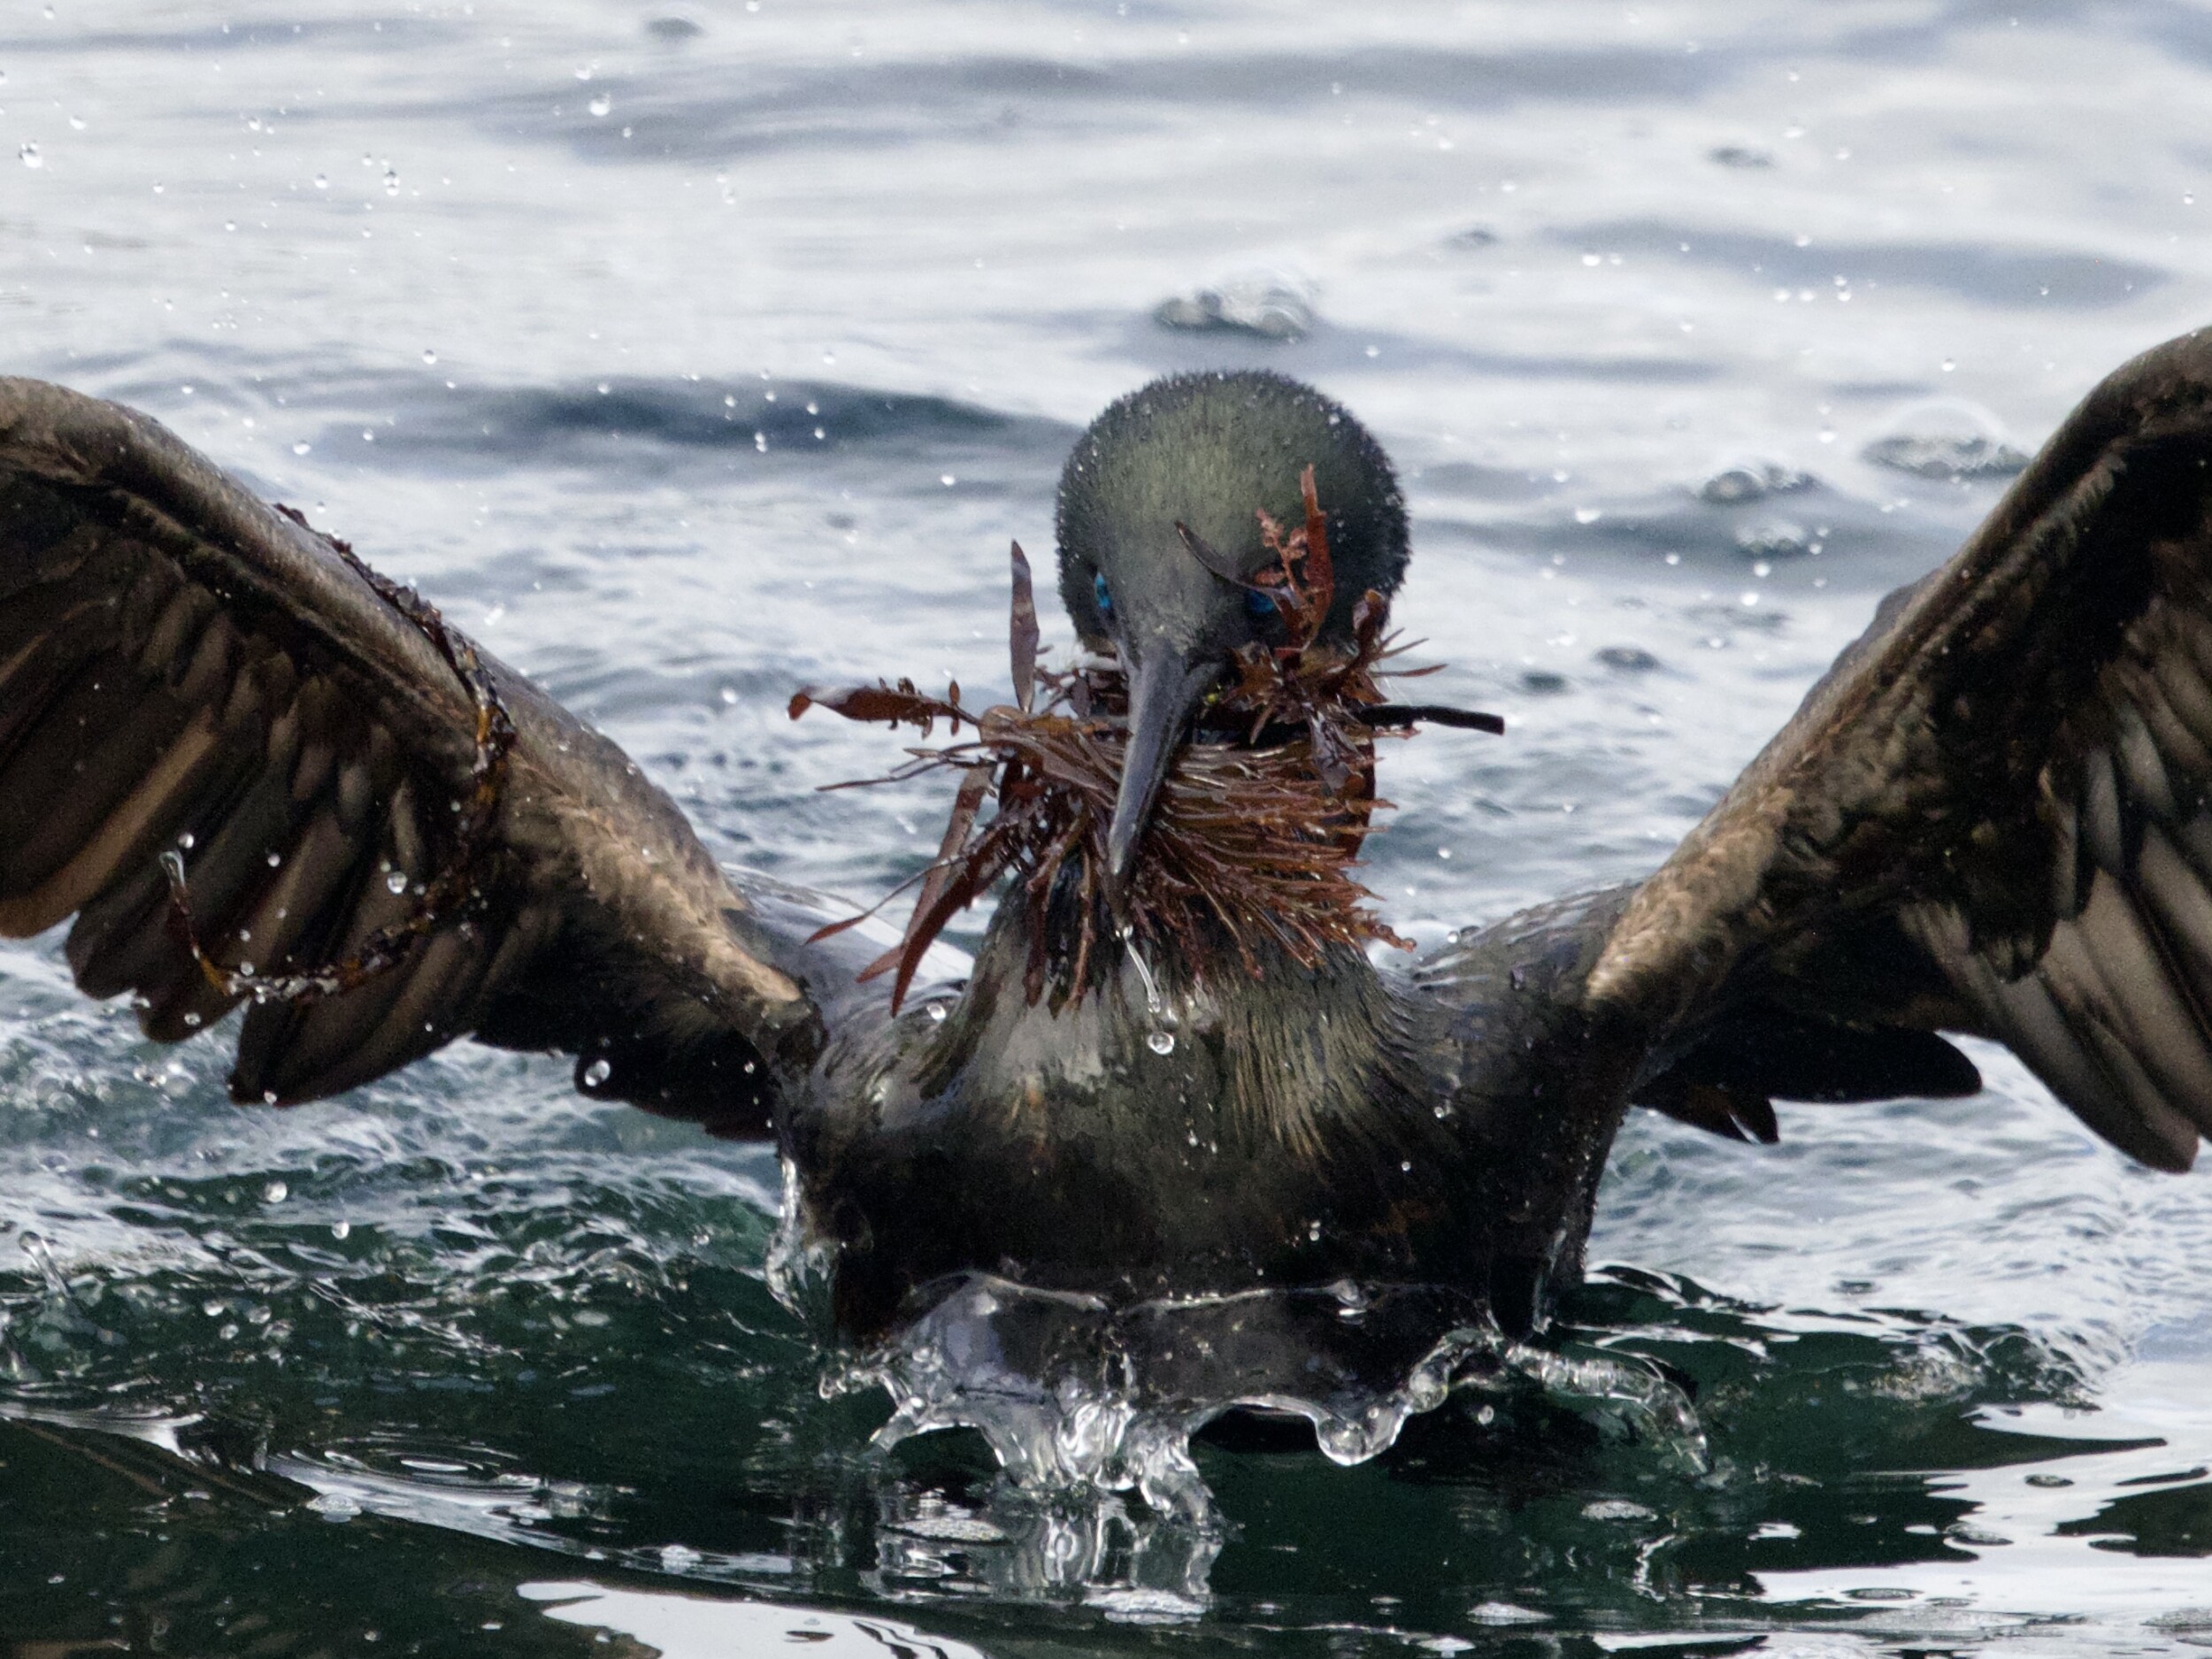 Brandt's Cormorant with Seaweed Nesting Material